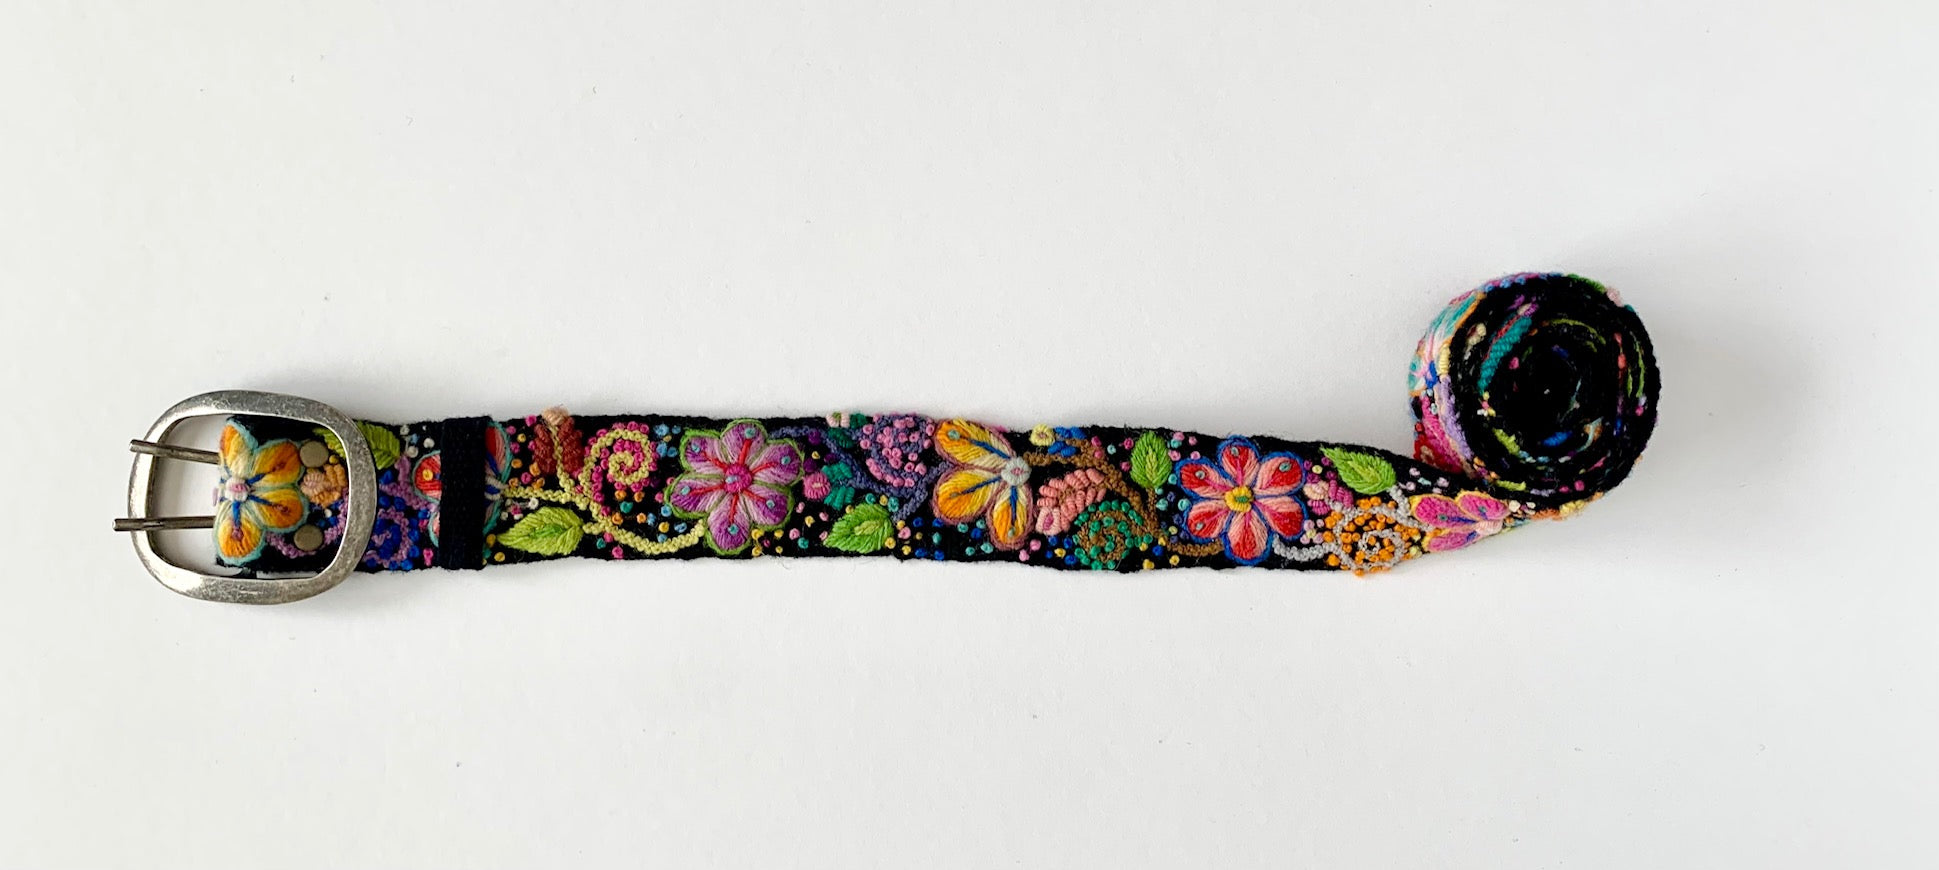 Black Floral Belt with colorful fabric flowers and leaves, hand loomed and embroidered by fair trade artisans in Peru.